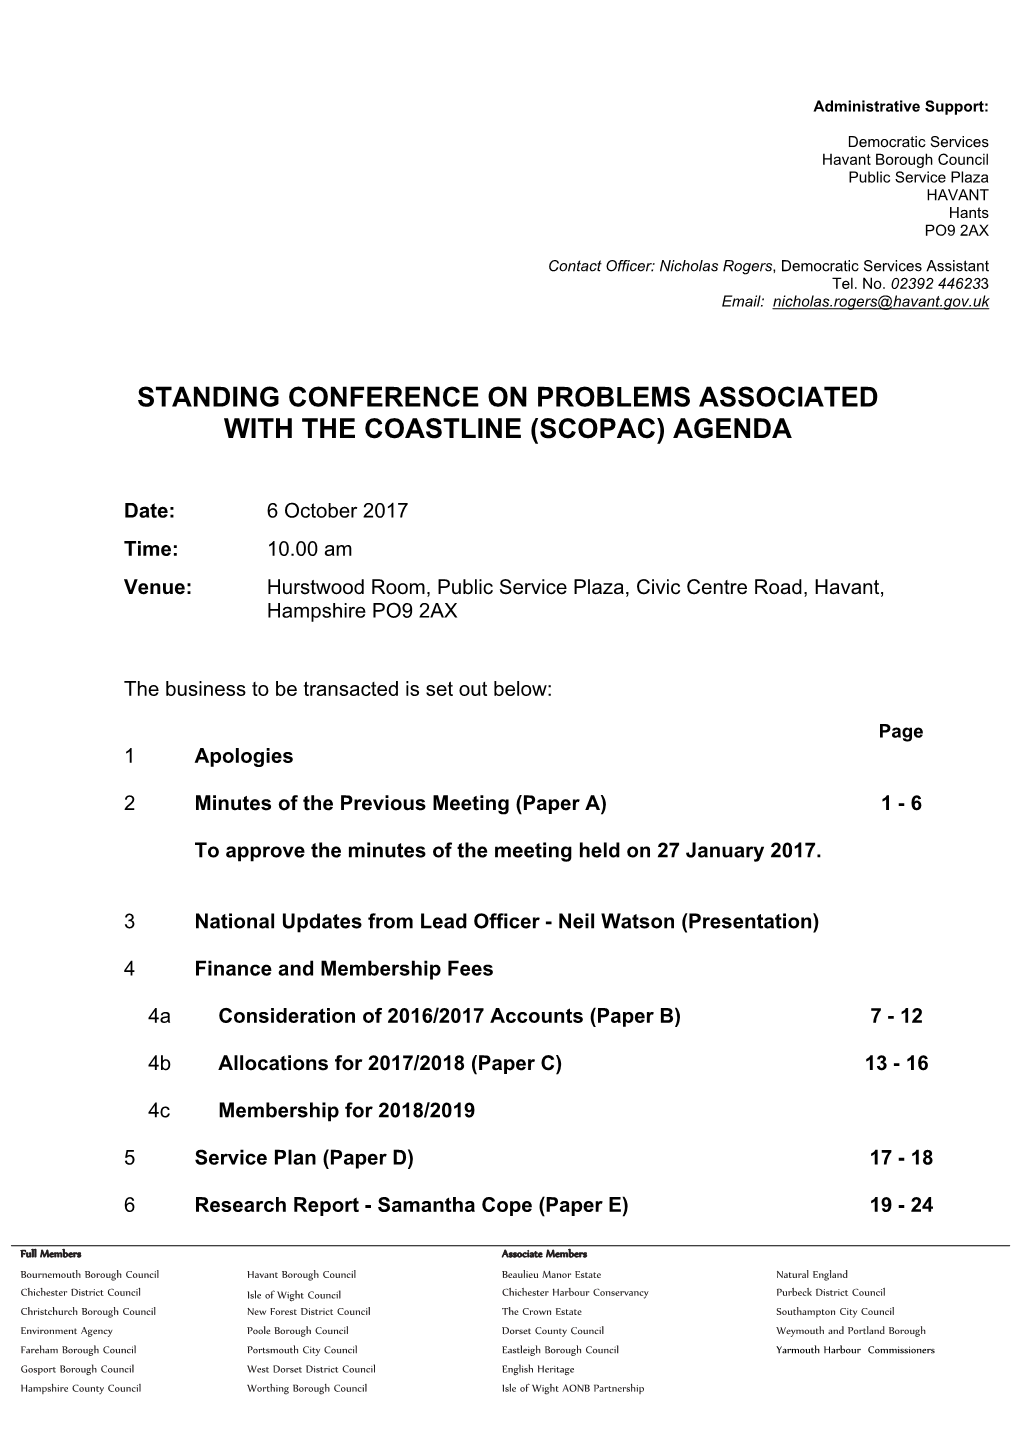 (Public Pack)Agenda Document for Standing Conference on Problems